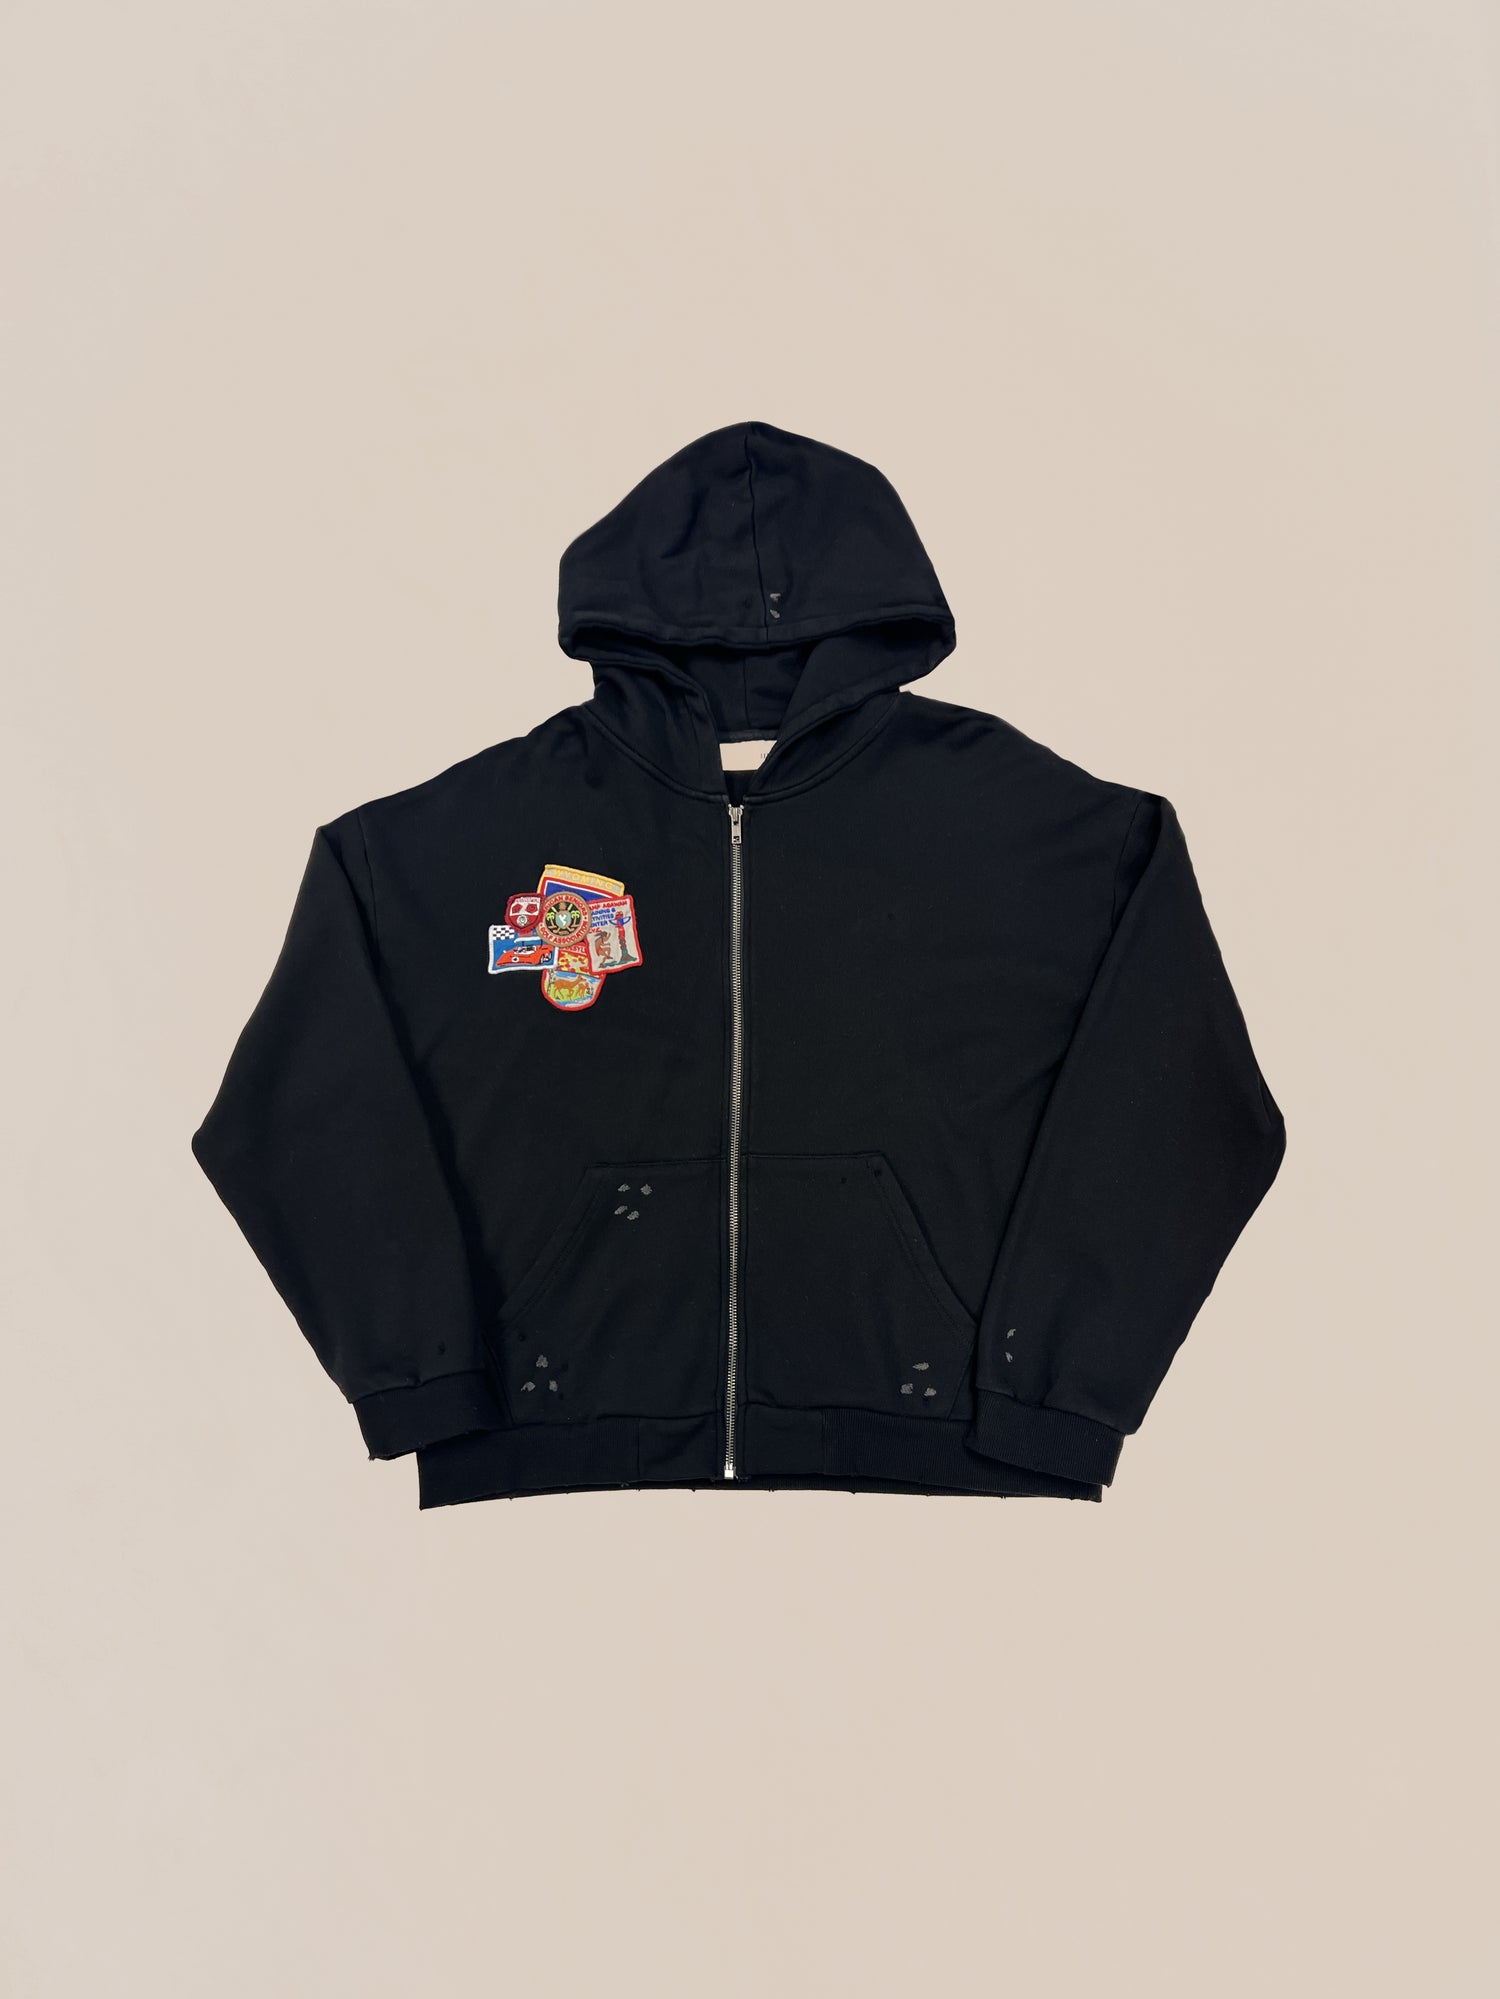 Black Sample 60 (Graphic Doodle Hoodie) with zipper and a colorful patch on the left chest displayed against a plain background. This is a Pre-production Sample by Profound.